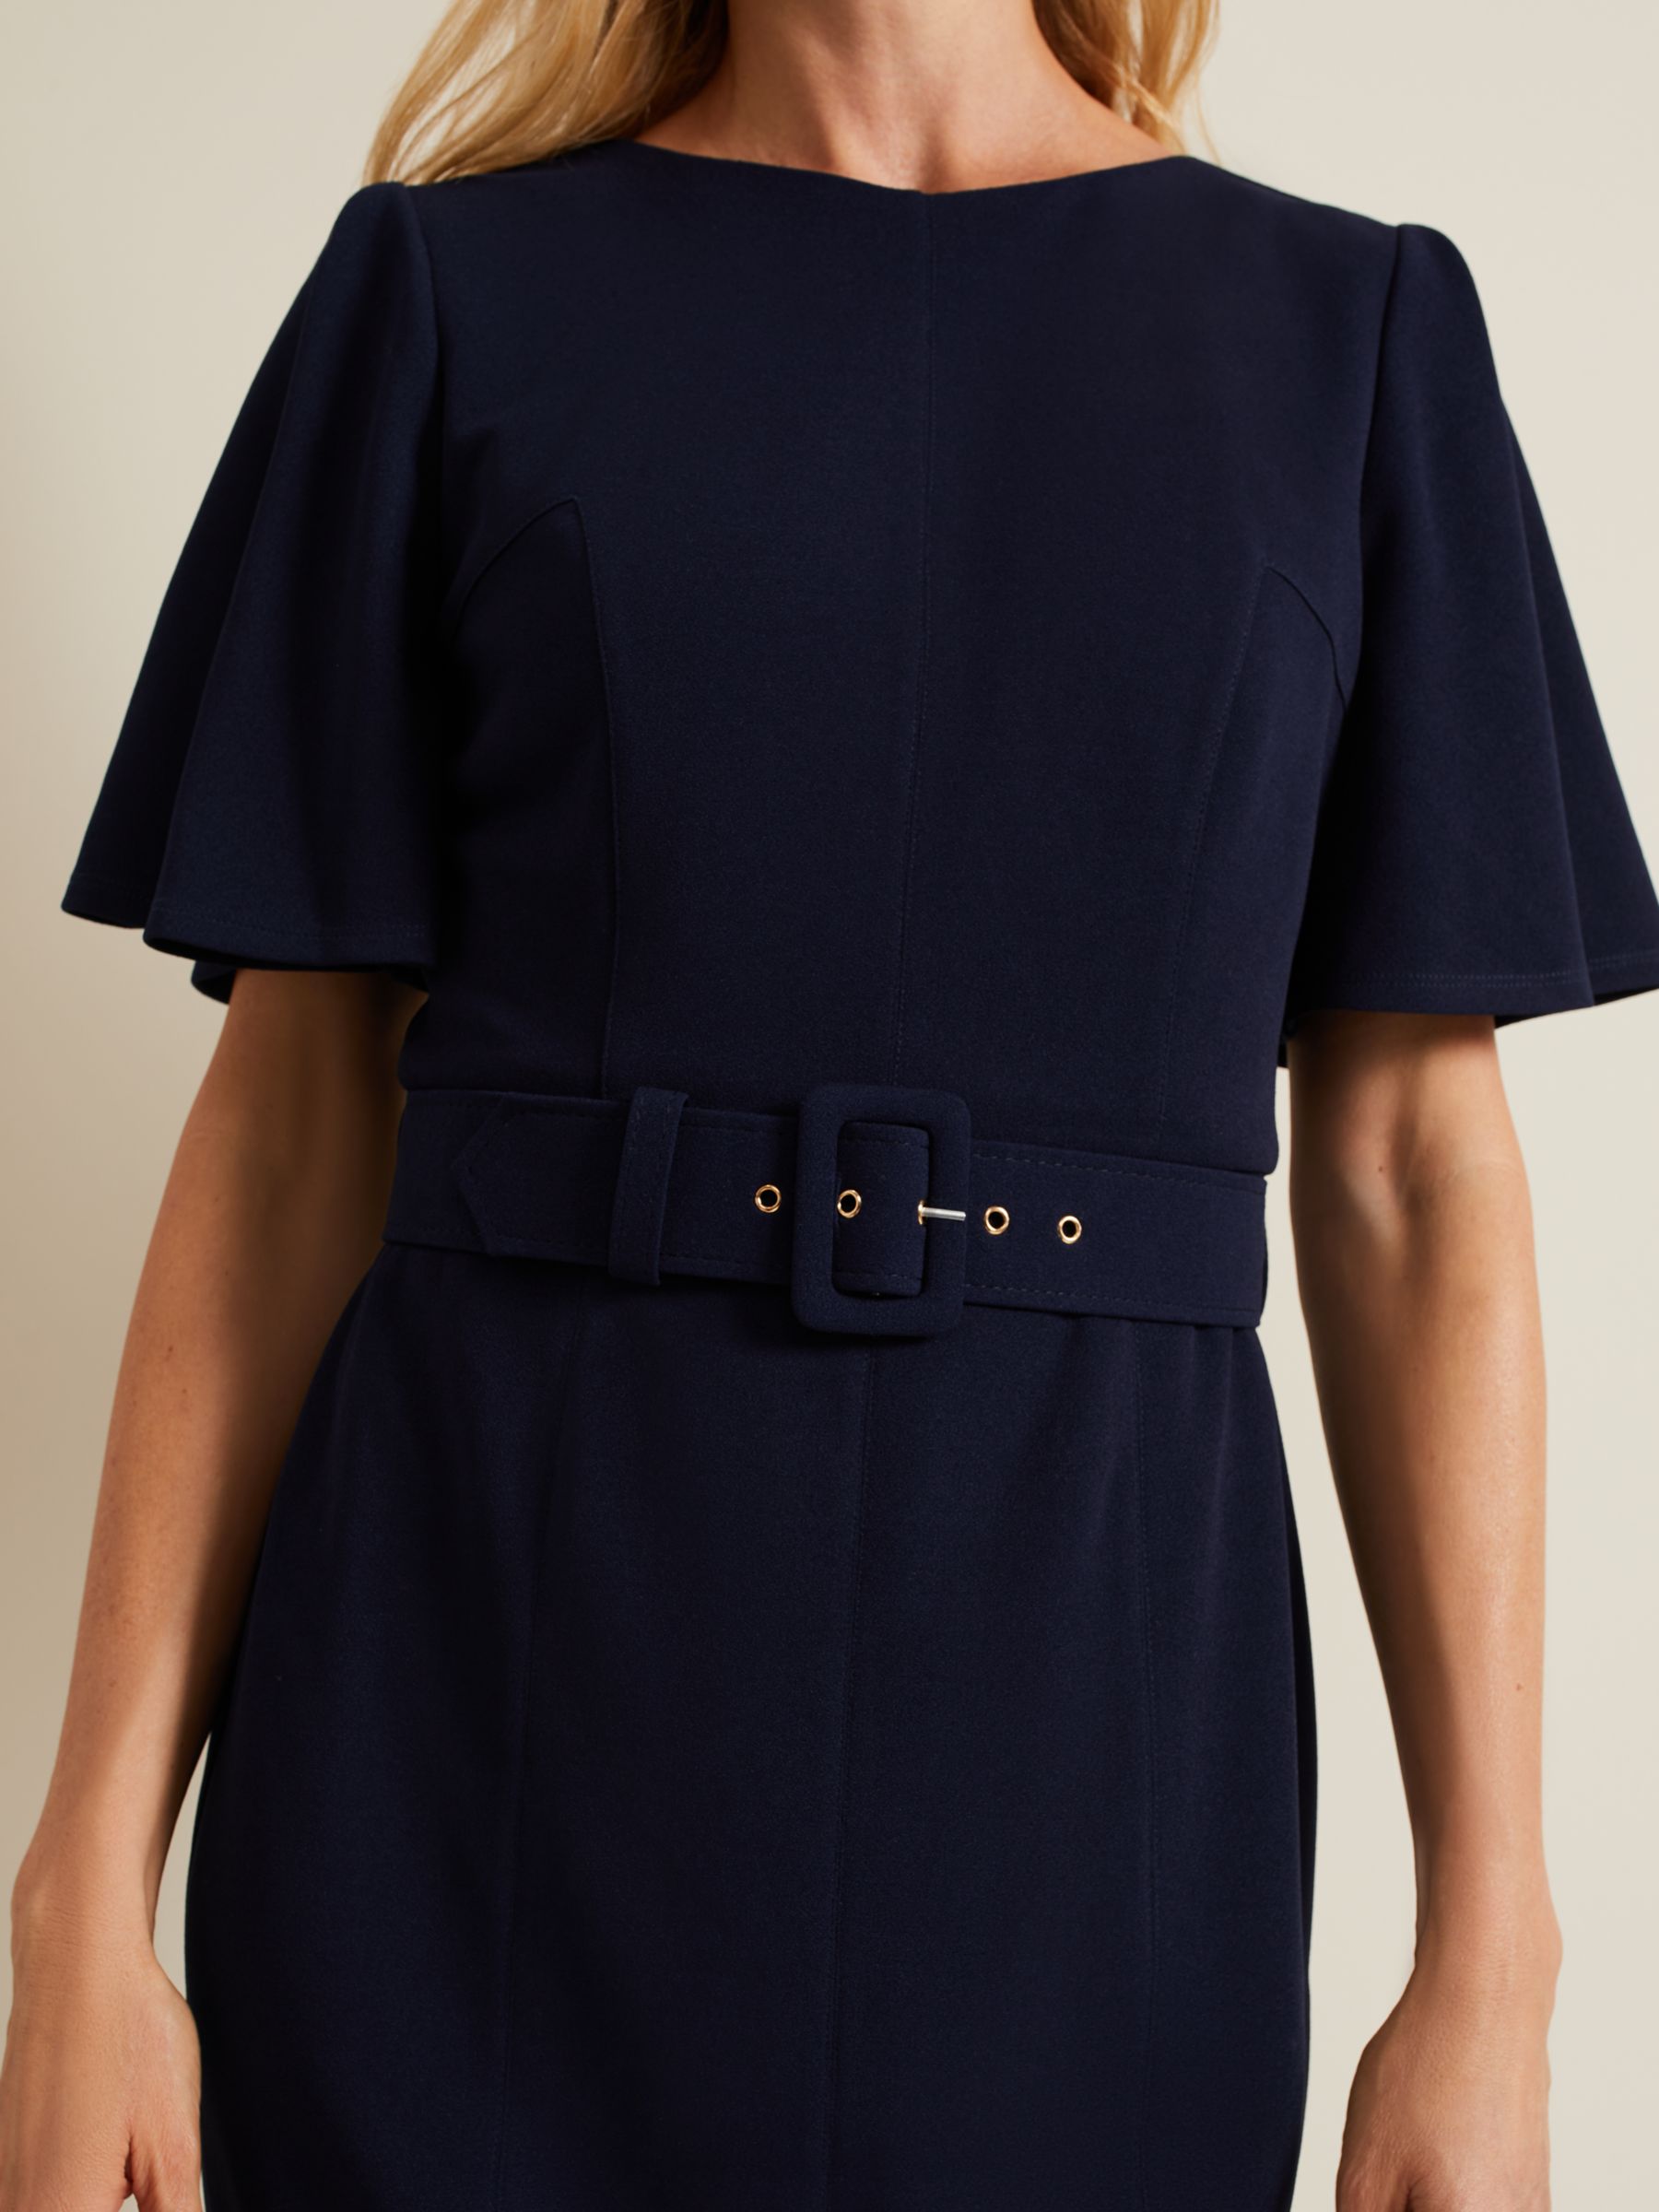 Buy Phase Eight Fanella Belted Jersey Dress, Navy Online at johnlewis.com